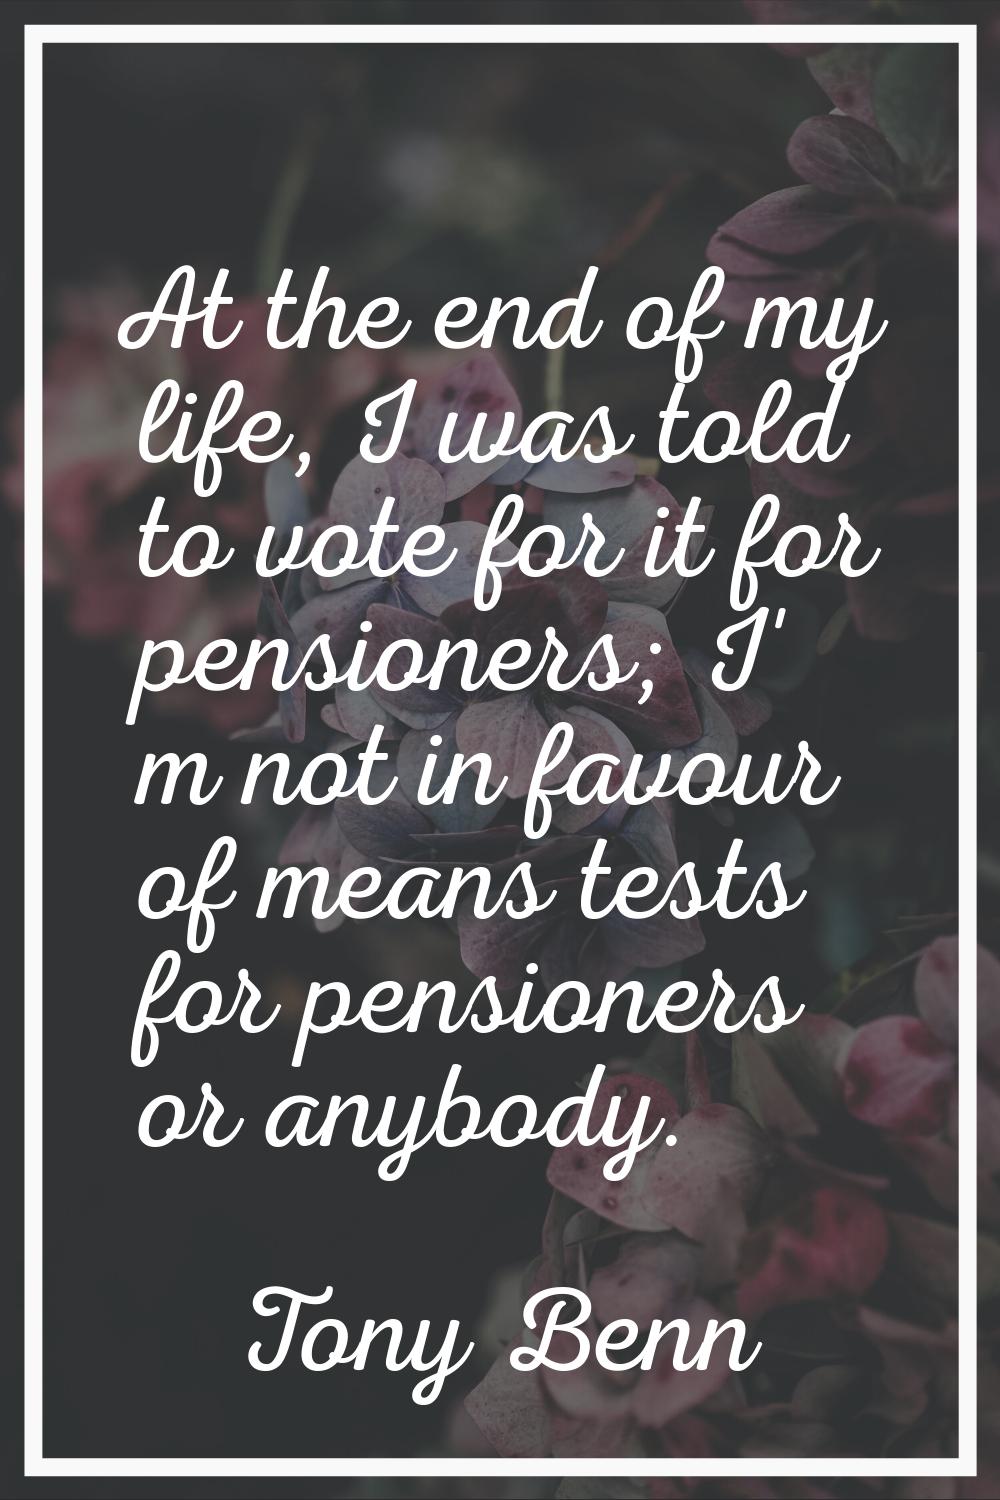 At the end of my life, I was told to vote for it for pensioners; I' m not in favour of means tests 